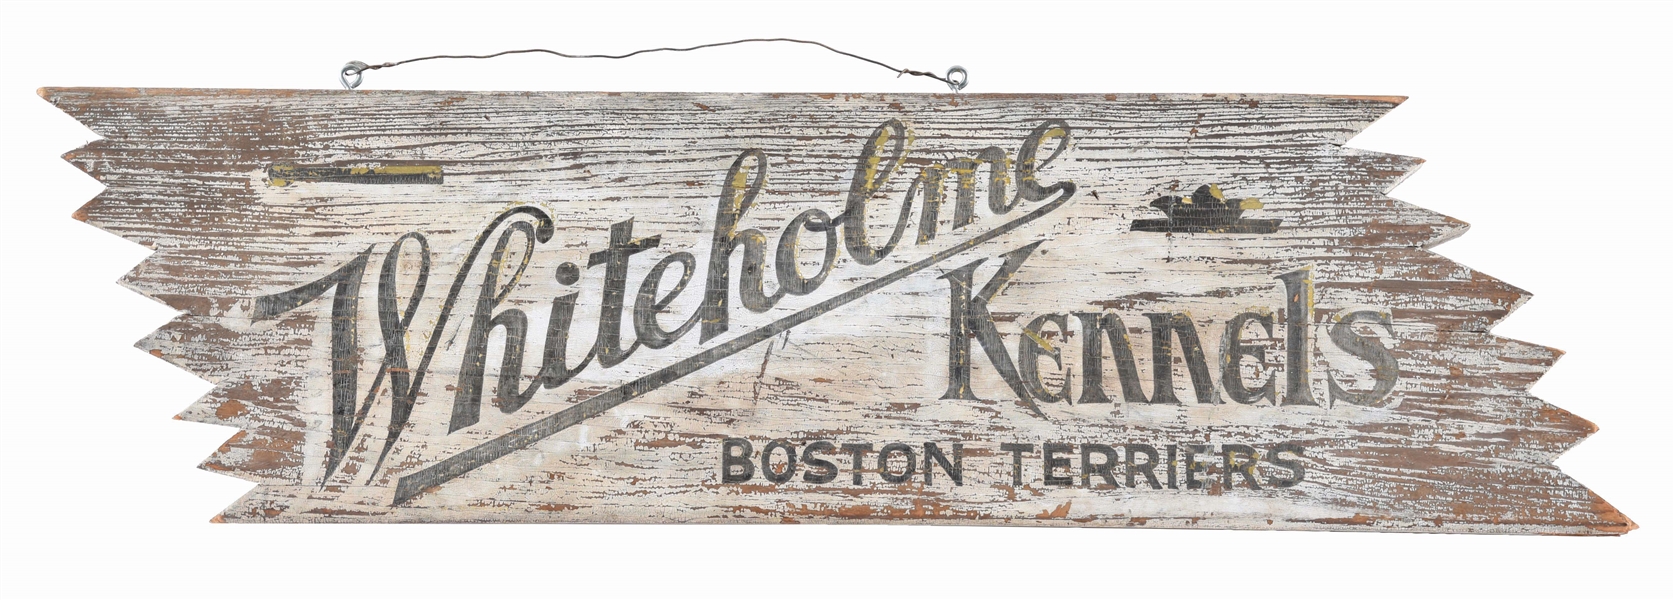 WHITEHOLME KENNELS BOSTON TERRIERS WOODEN SIGN.